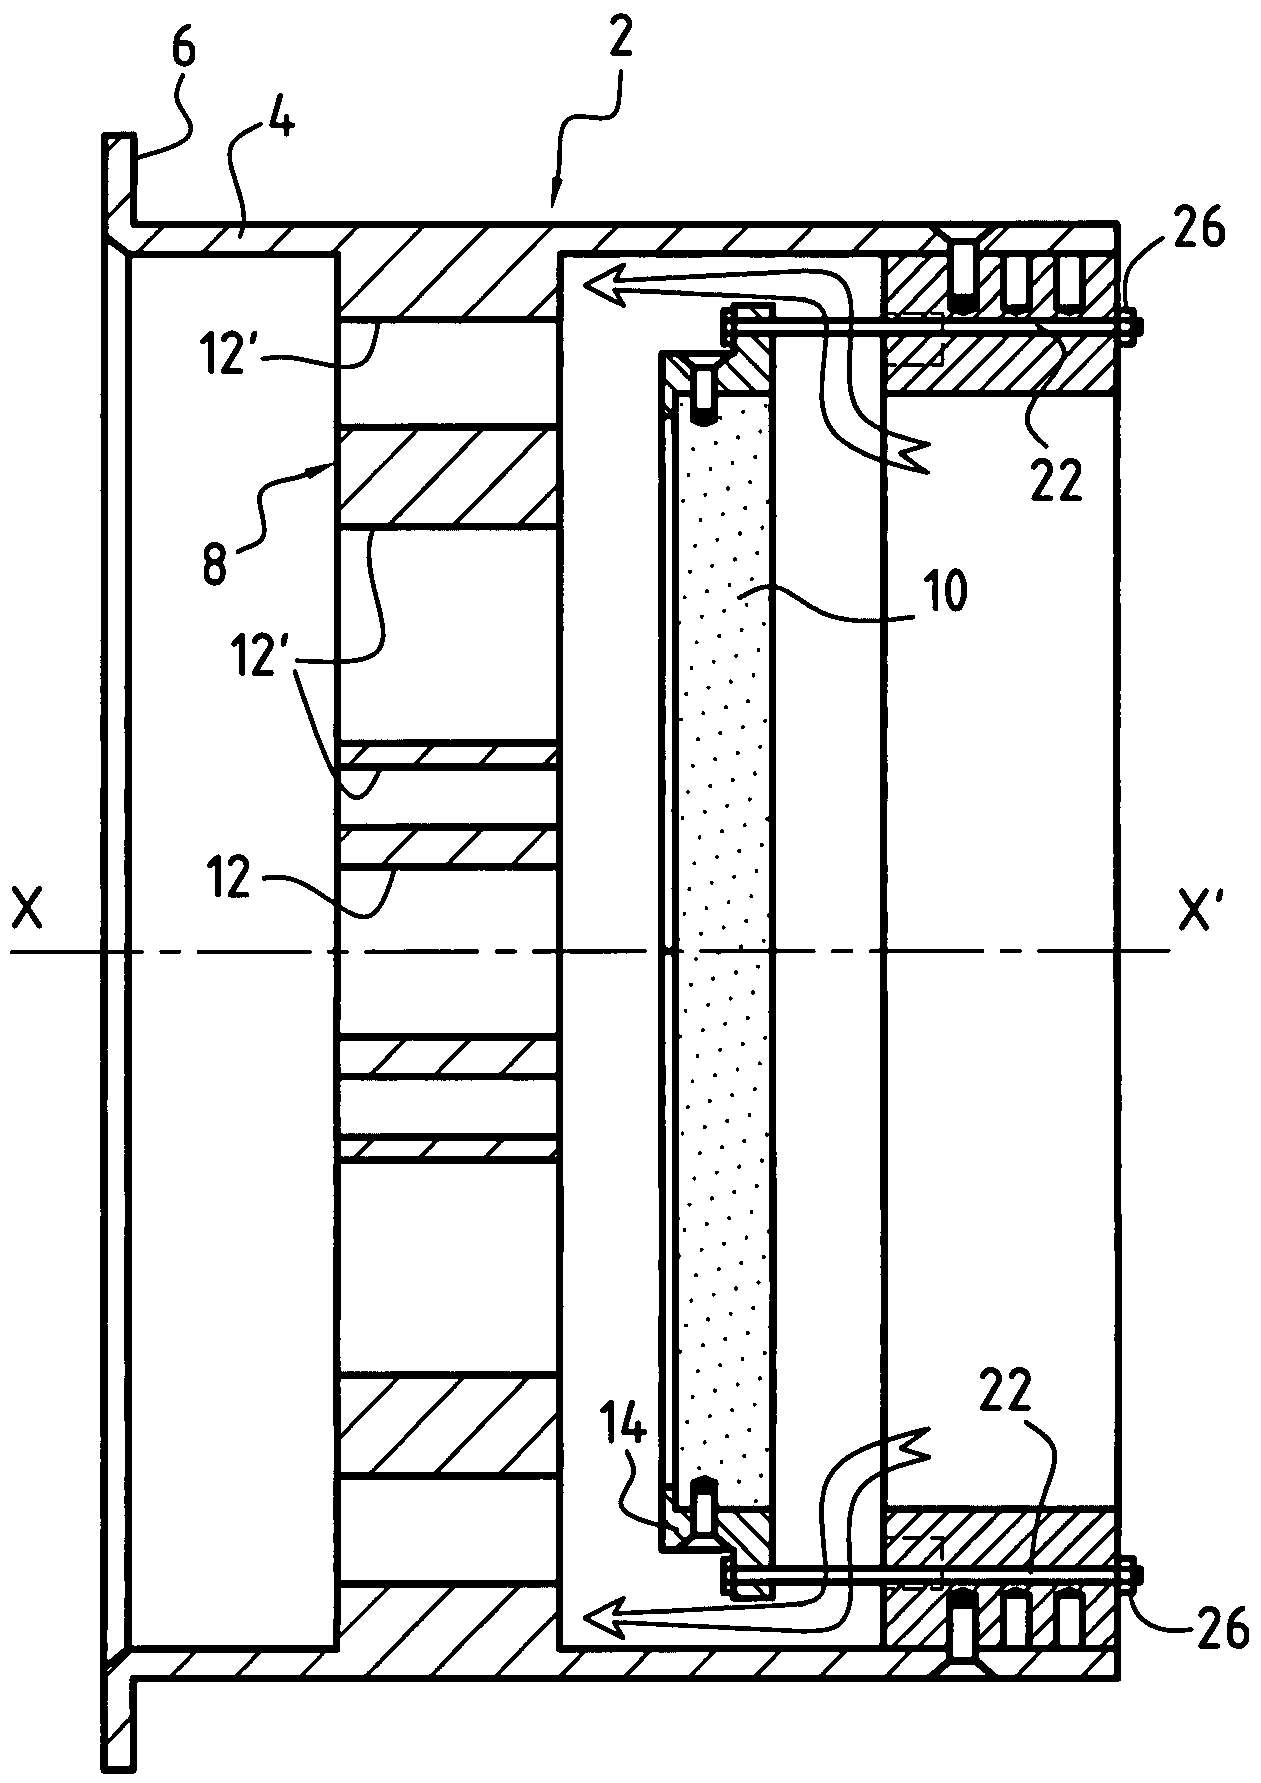 Flow conditioner for a fluid transport pipe